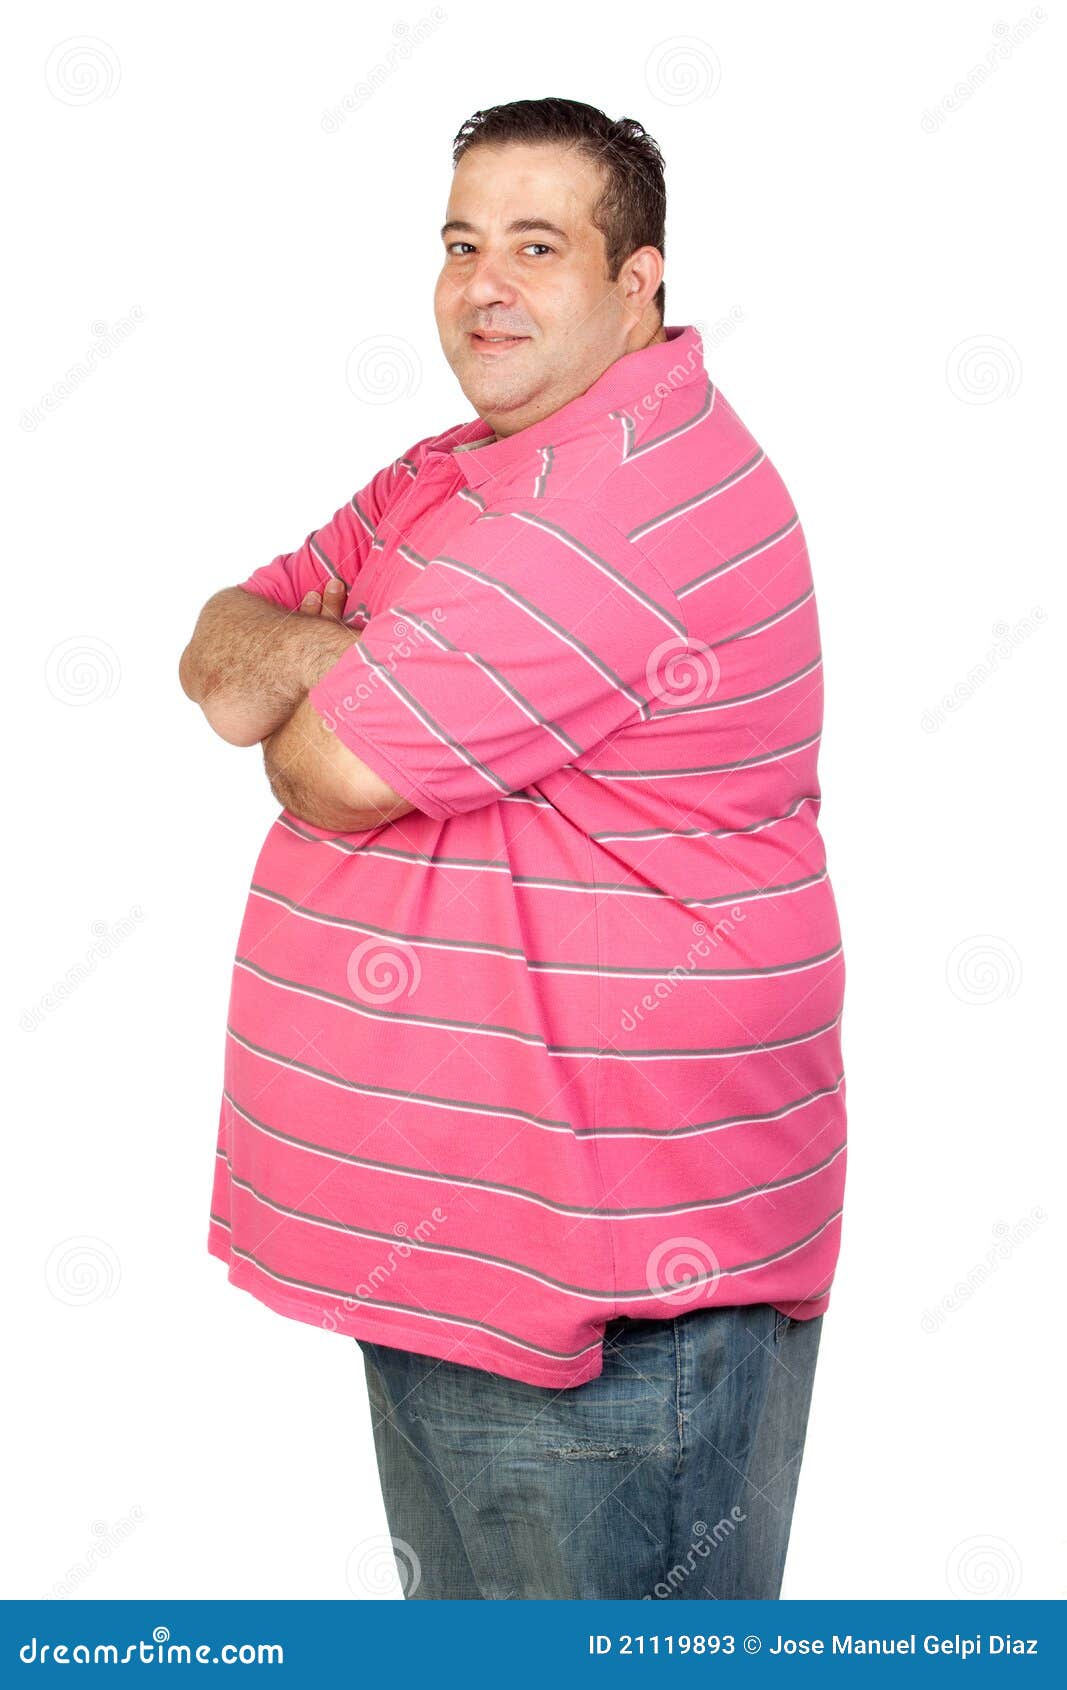 Men very fat pictures of 50 Very